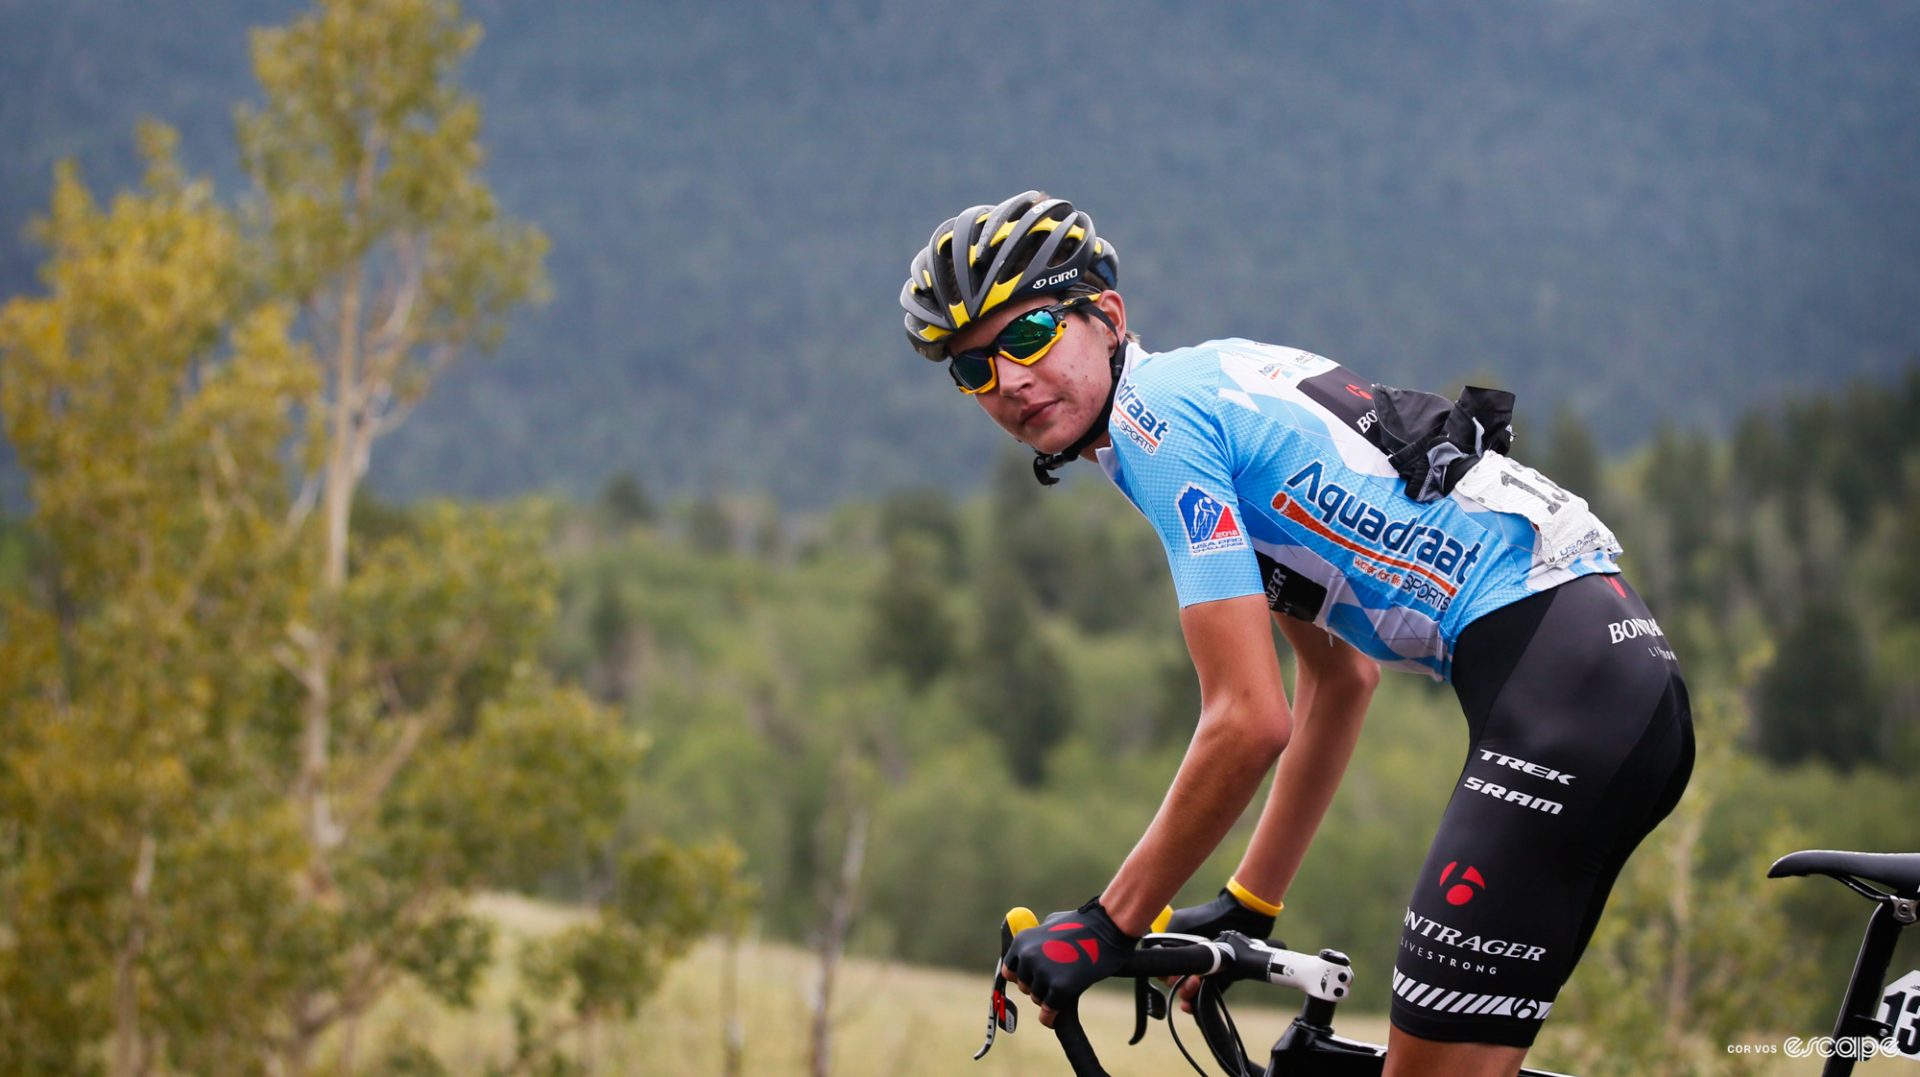 Joe Dombrowski looks at the camera while racing in the USA Pro Challenge. He's wearing the light blue jersey of the race's best young rider.